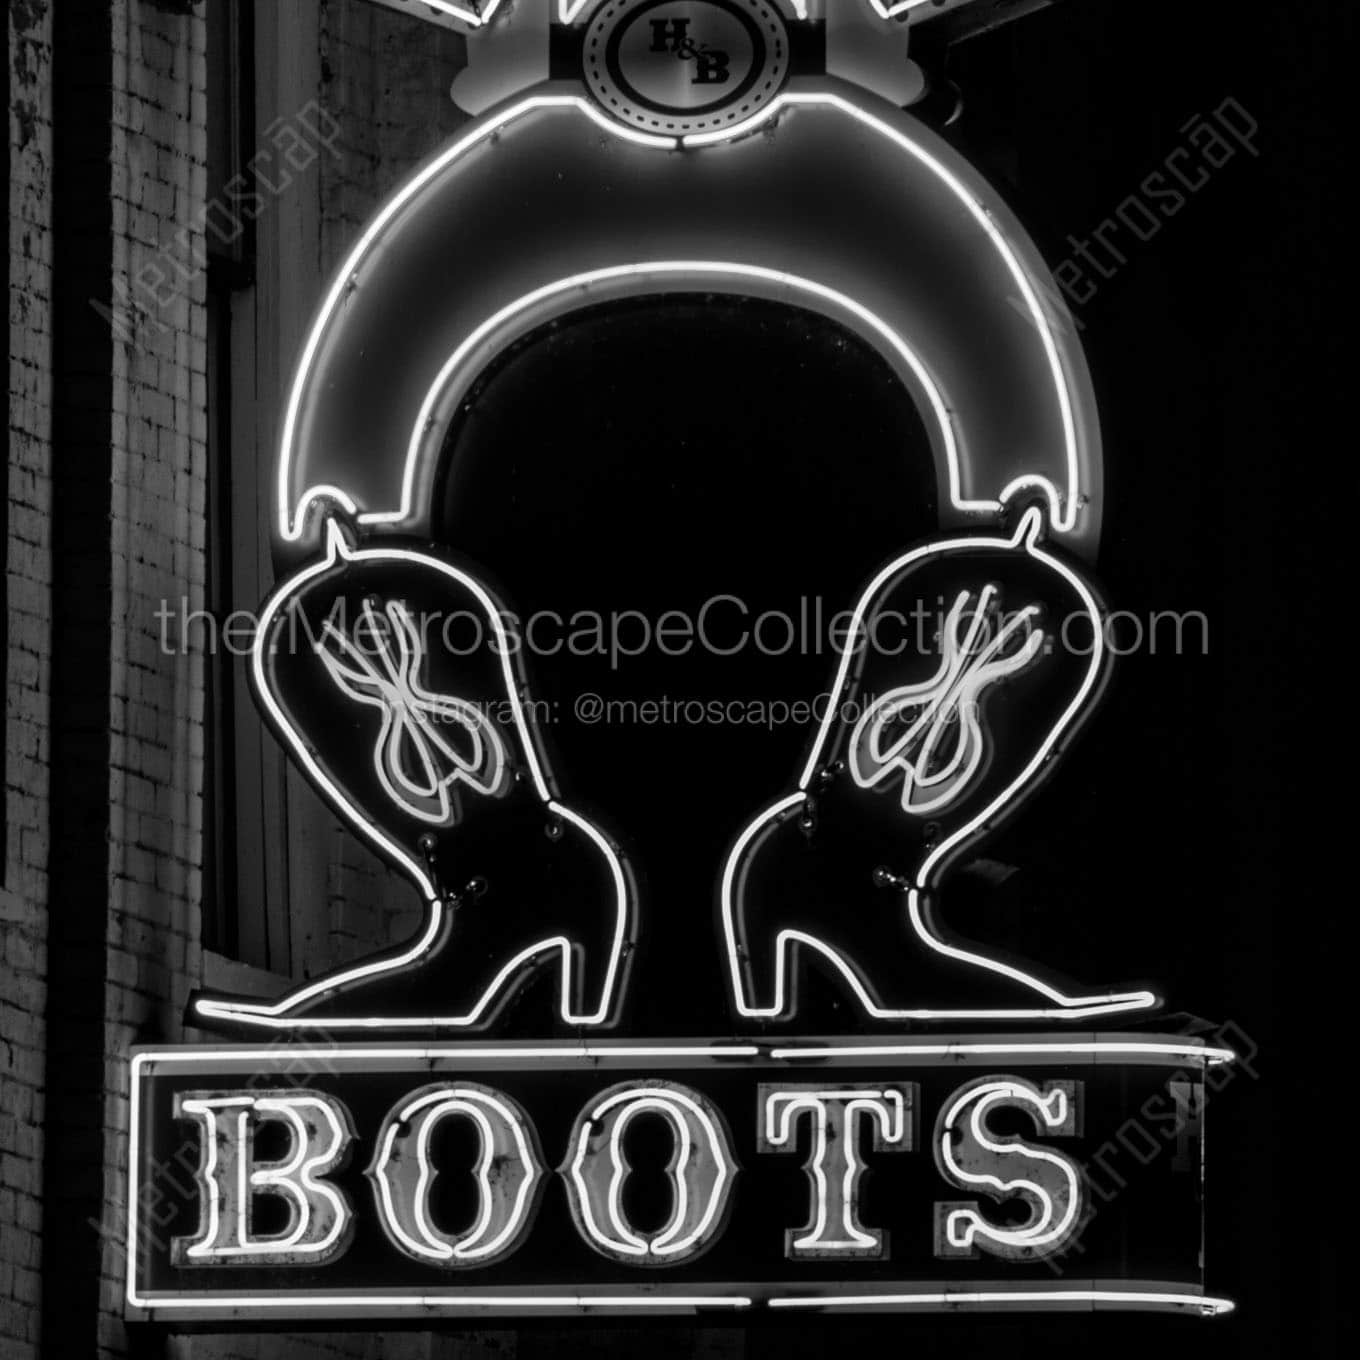 hats and boots neon sign Black & White Office Art